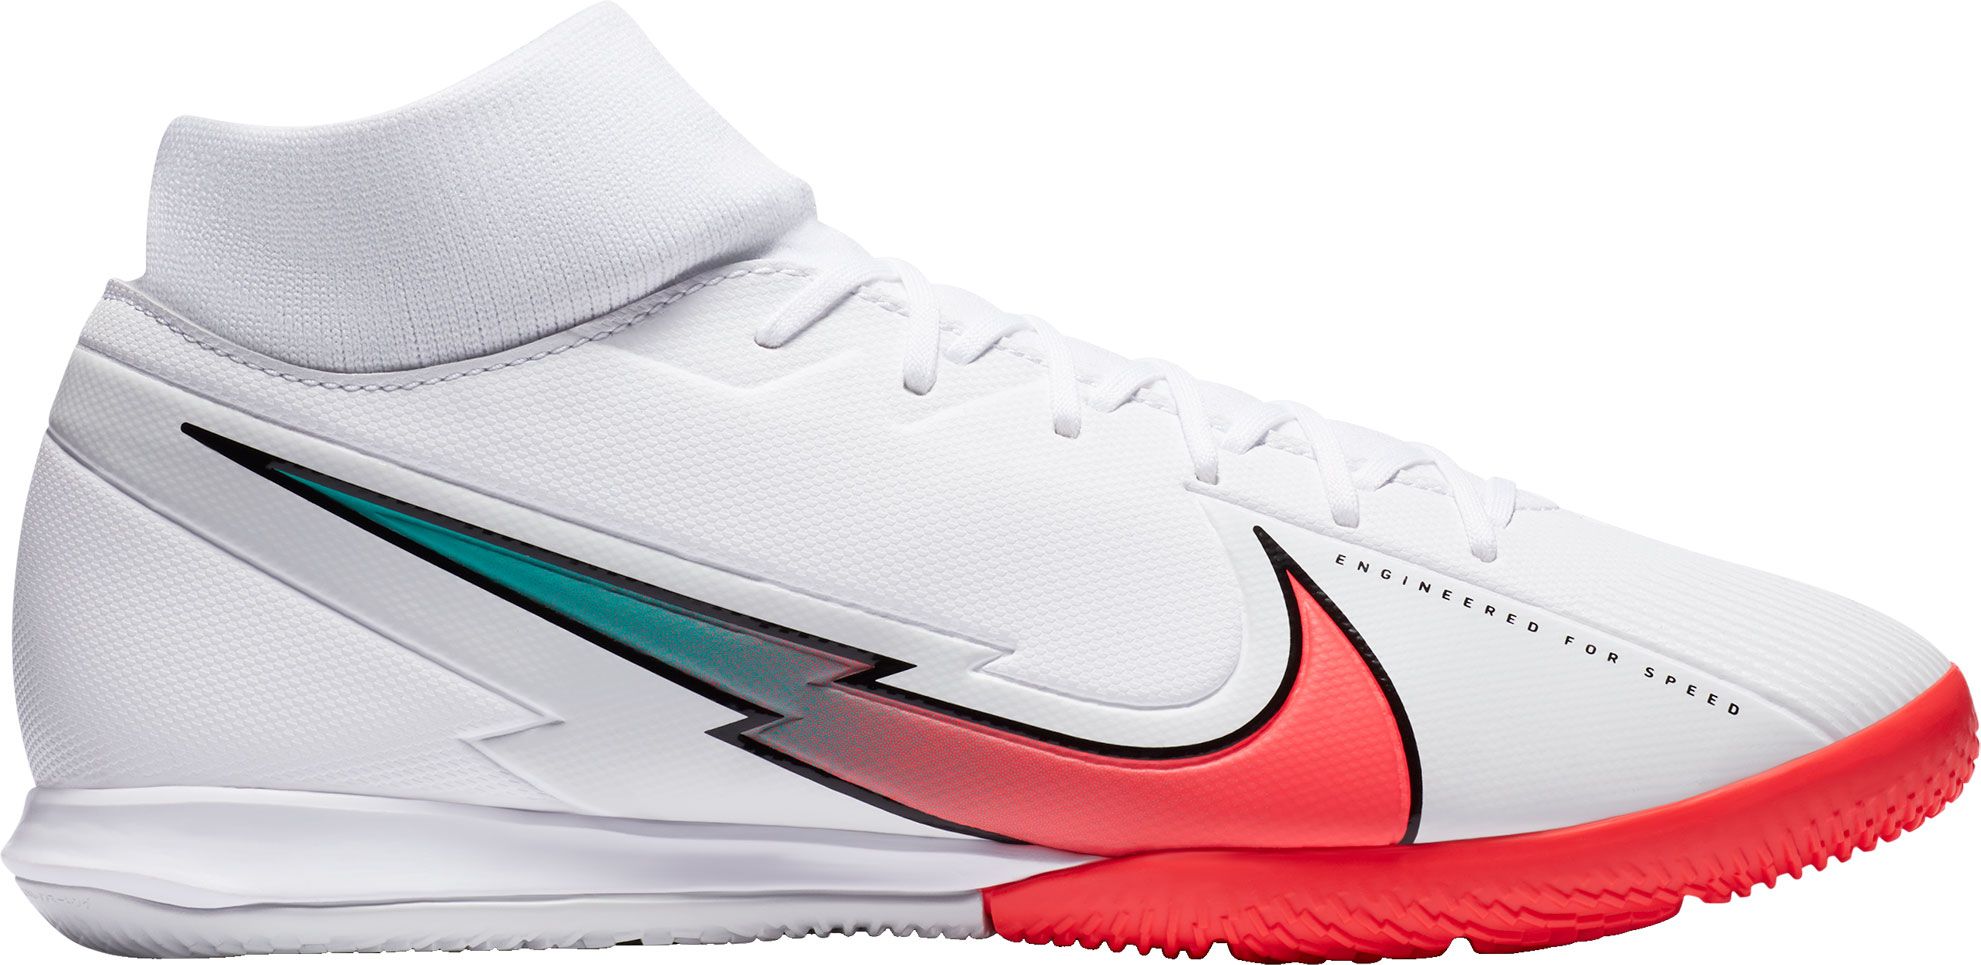 Nike Mercurial Superfly 7 Academy Indoor Soccer Shoes | DICK'S Sporting  Goods